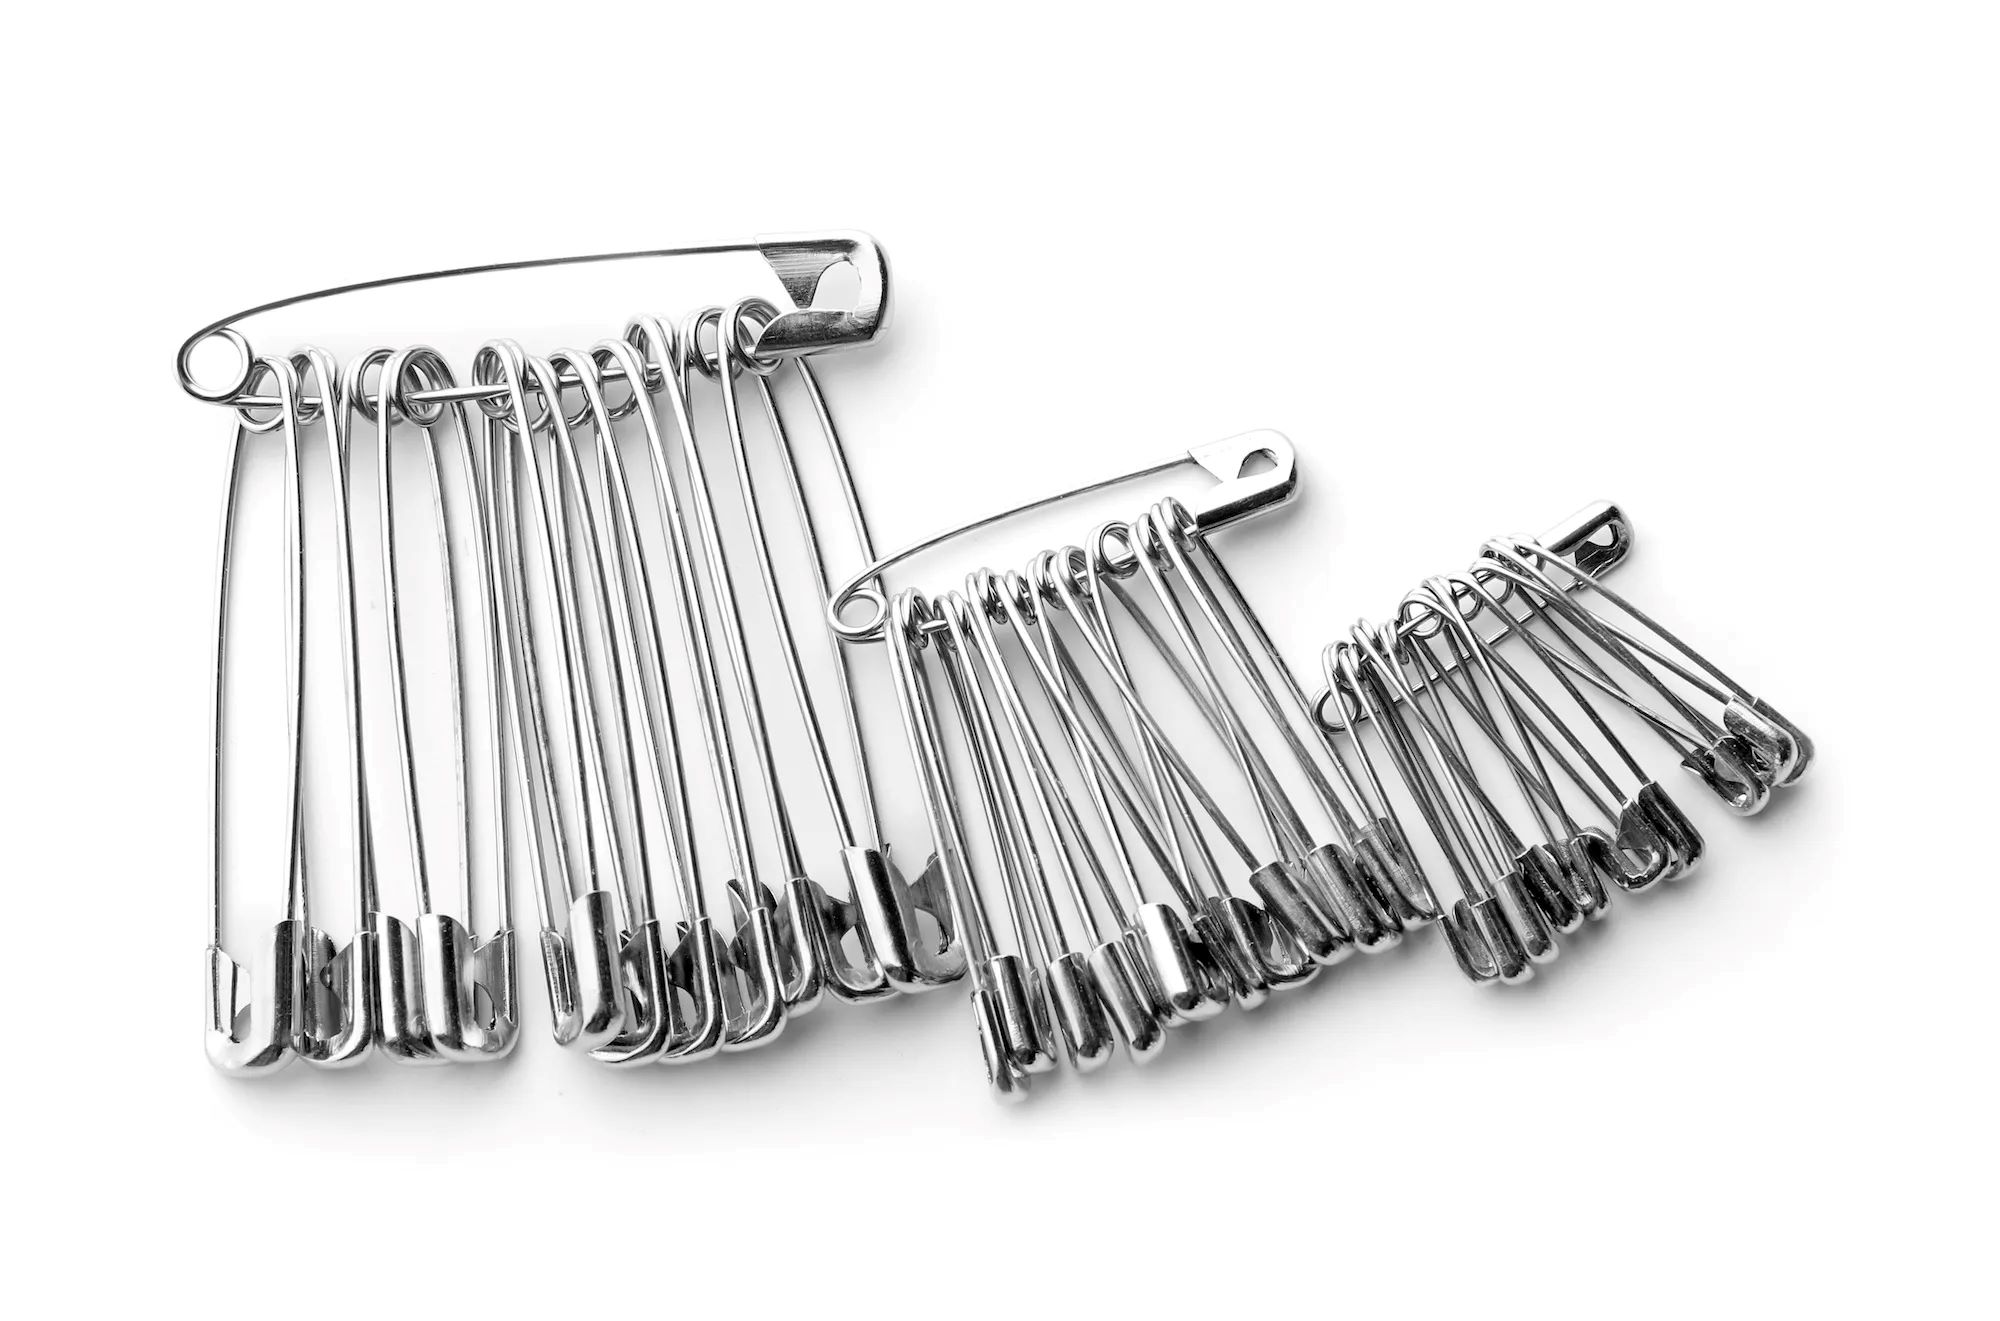 18-enigmatic-facts-about-safety-pins